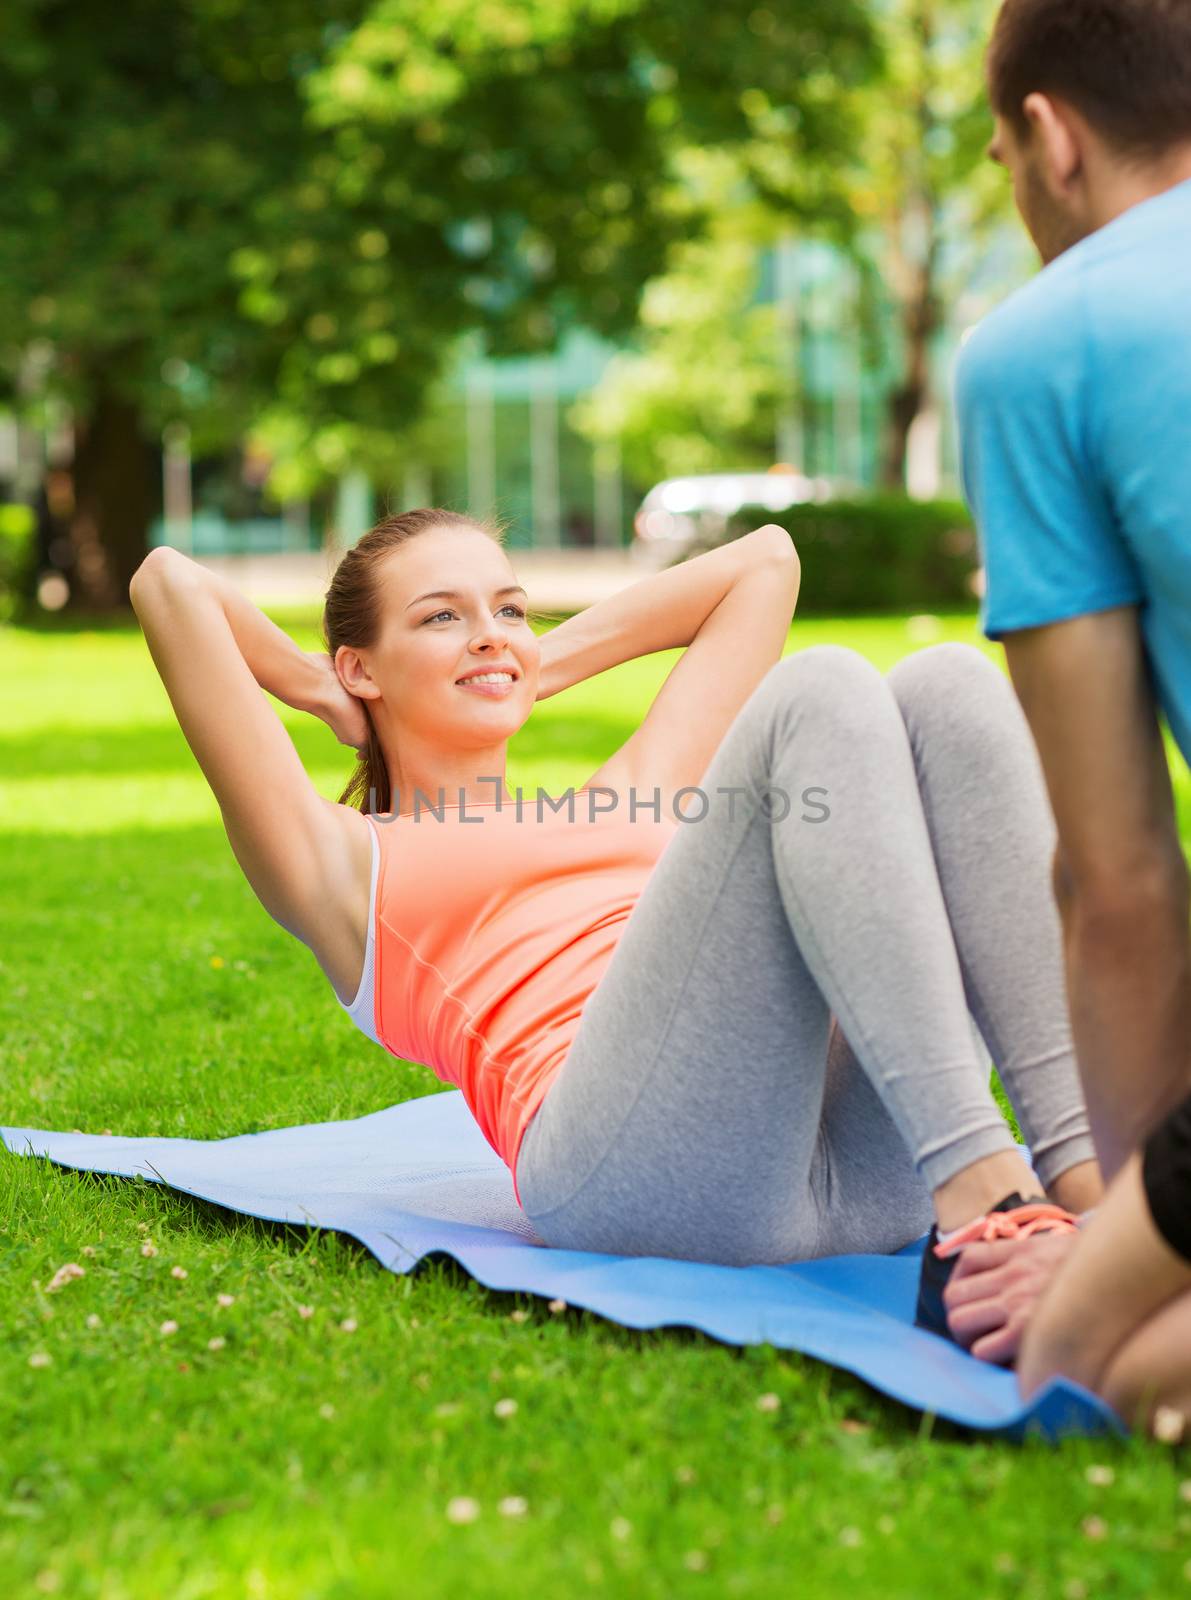 fitness, sport, training, park and lifestyle concept - smiling woman with personal trainer doing exercises on mat outdoors